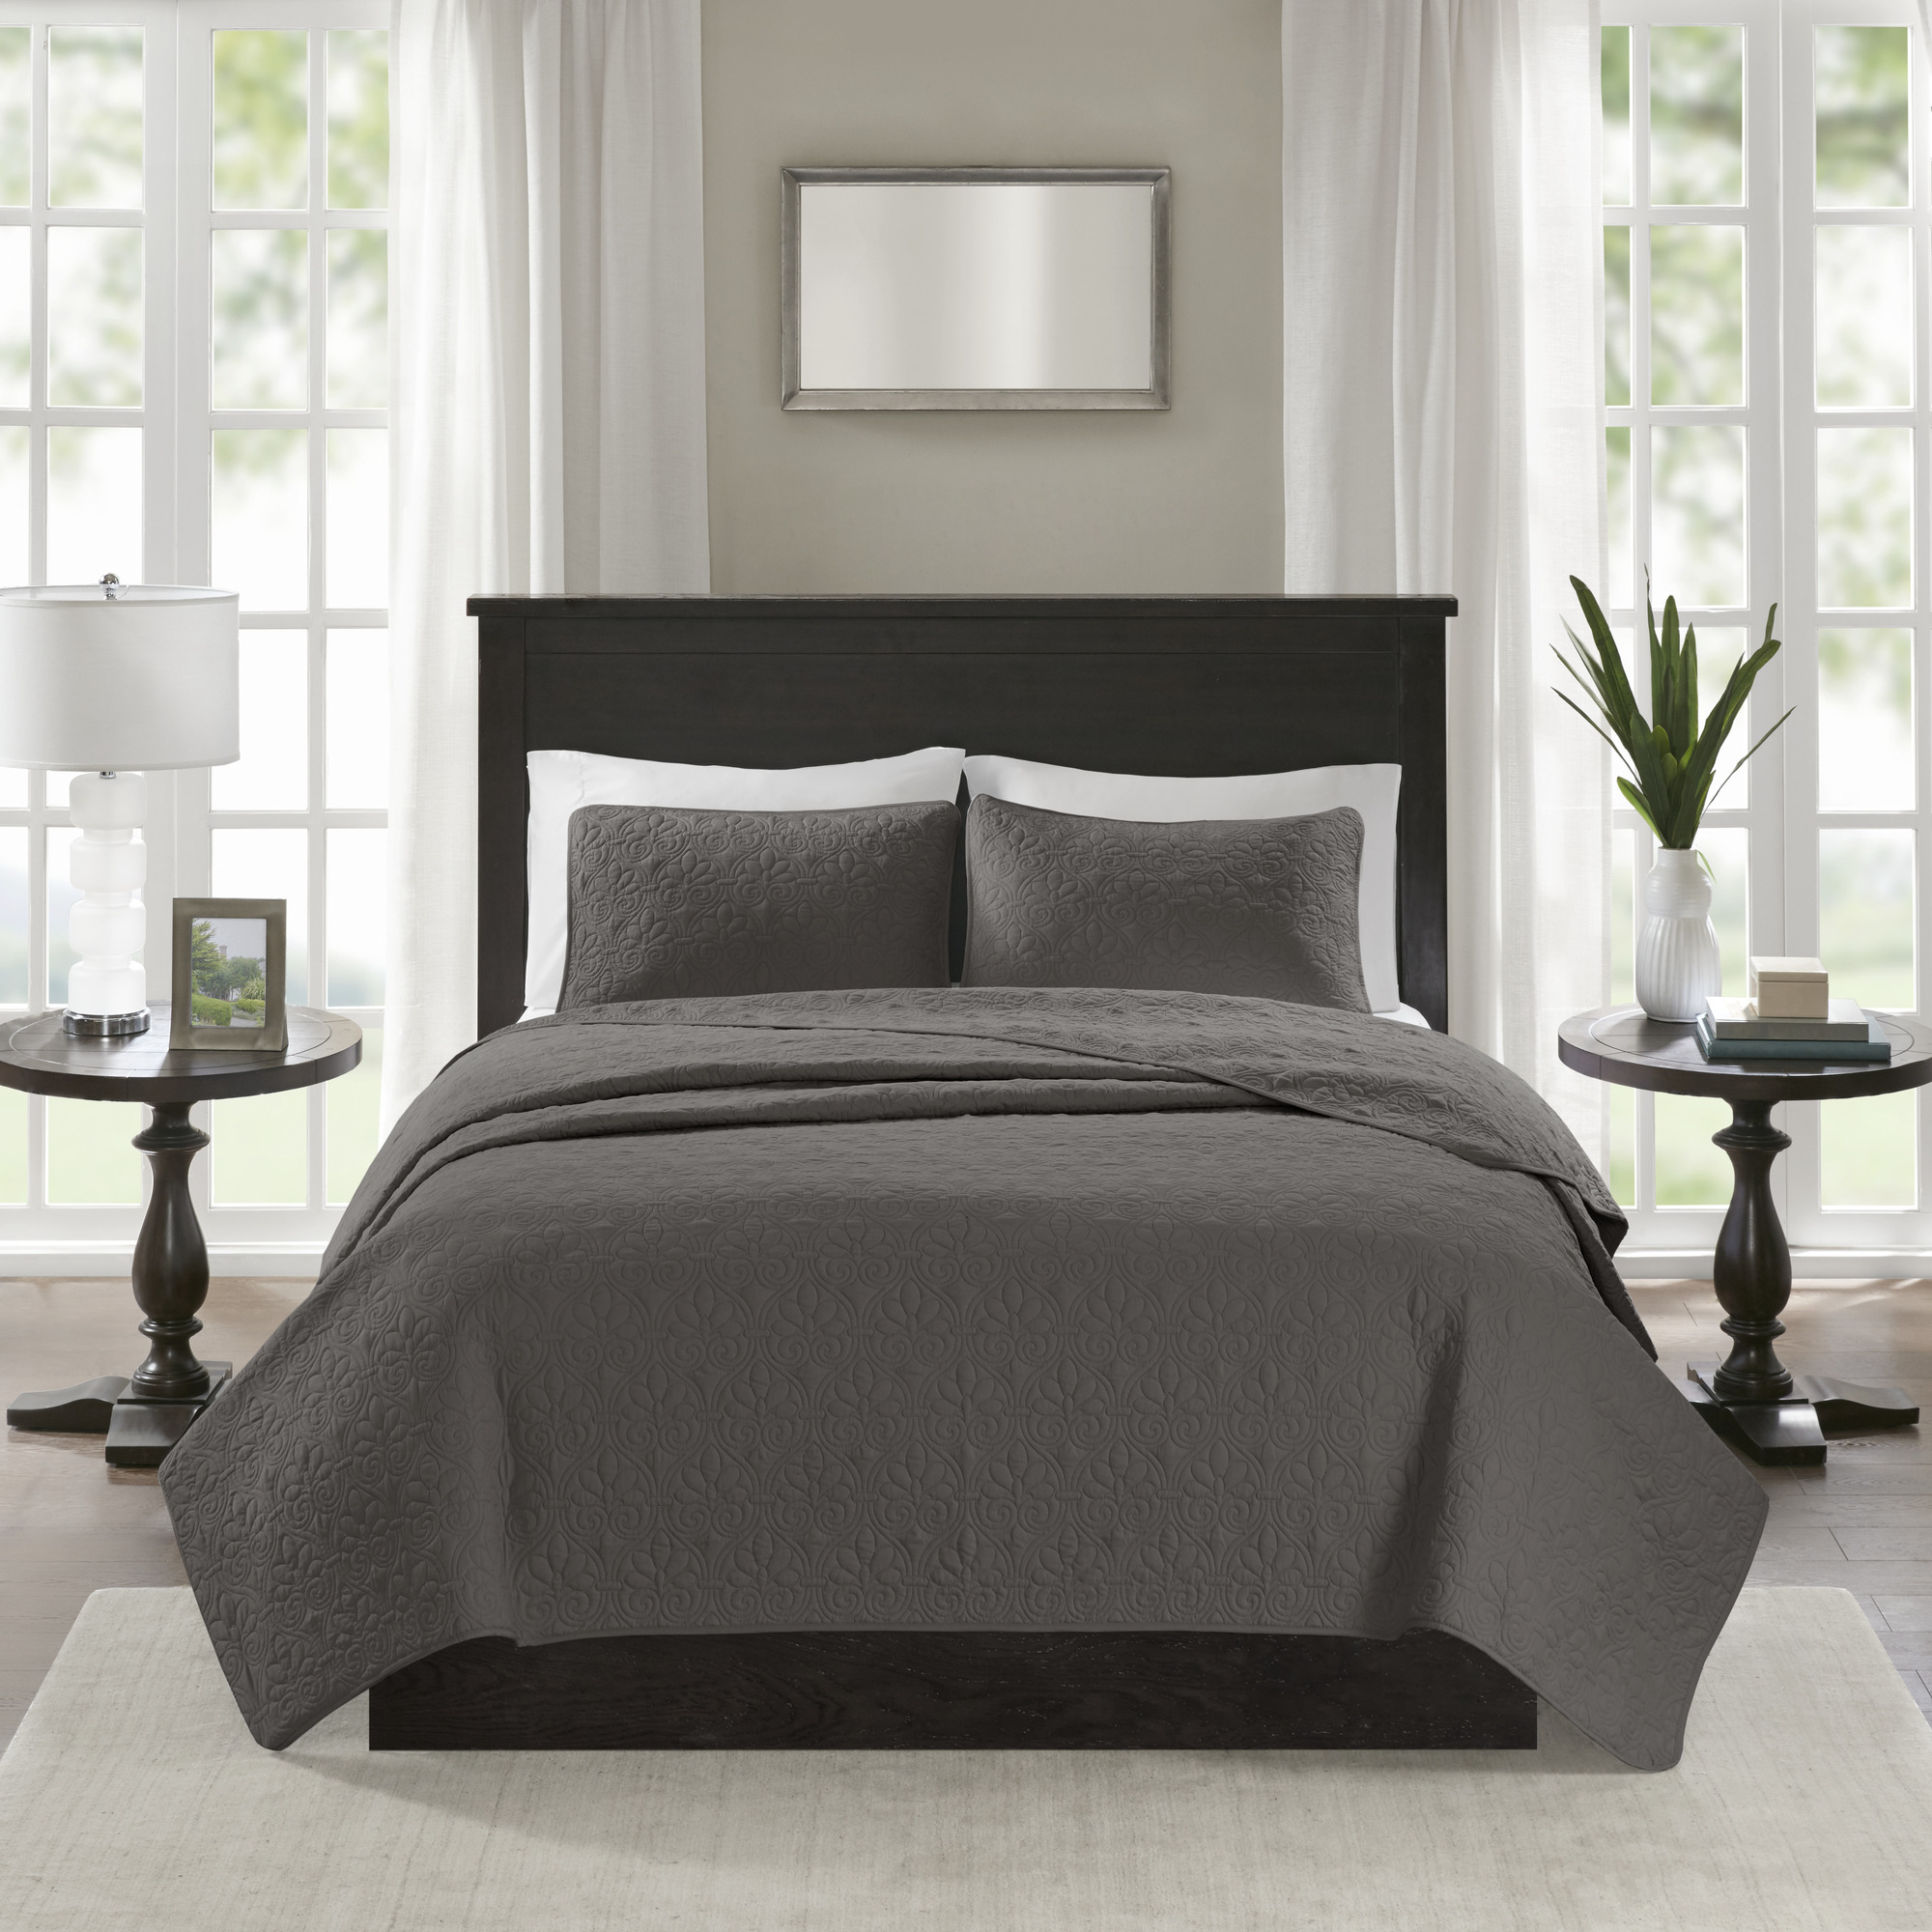 Home Essence Vancouver Super Soft Reversible Coverlet Set, Full/Queen, Dark Grey - image 4 of 13